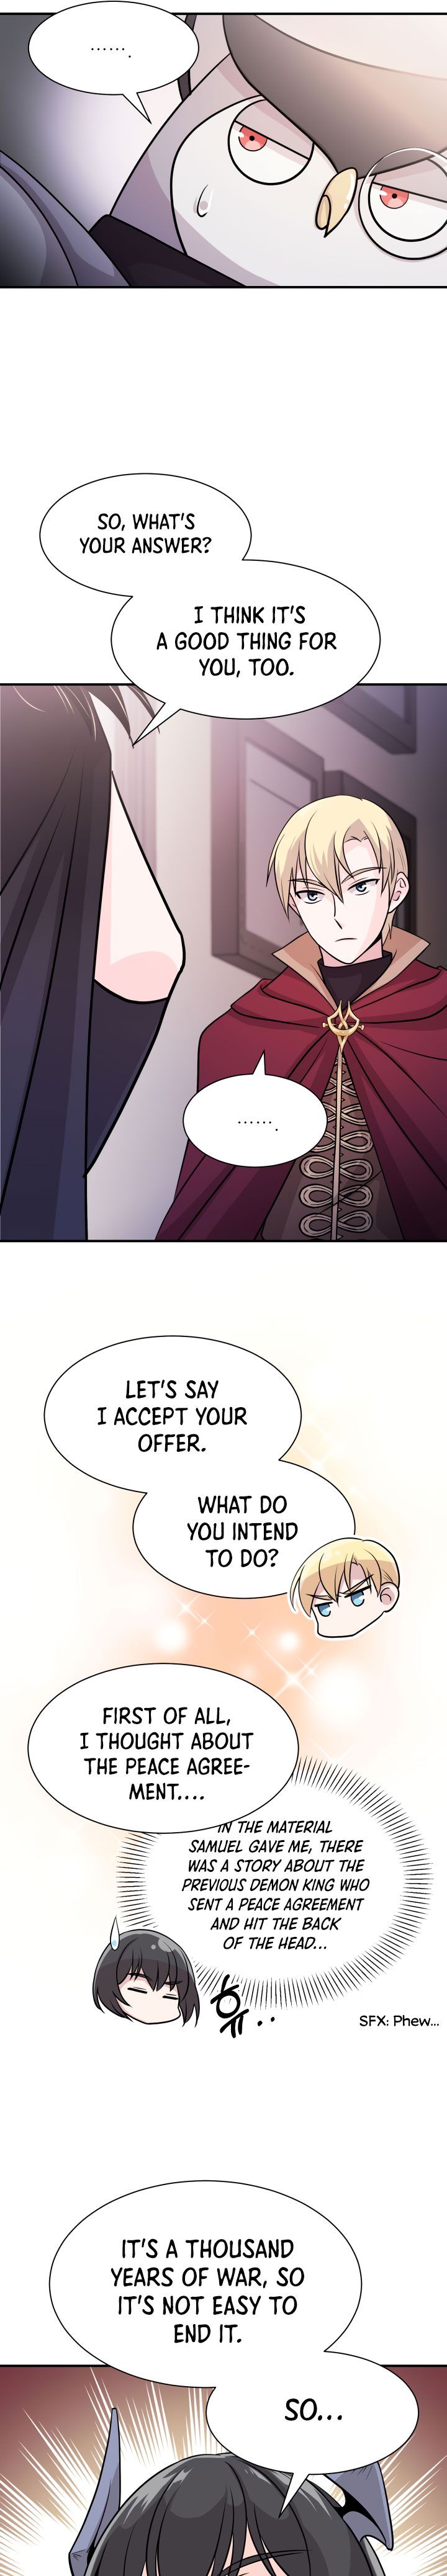 When I Opened My Eyes, I Had Become The Devil Chapter 3 - Page 7